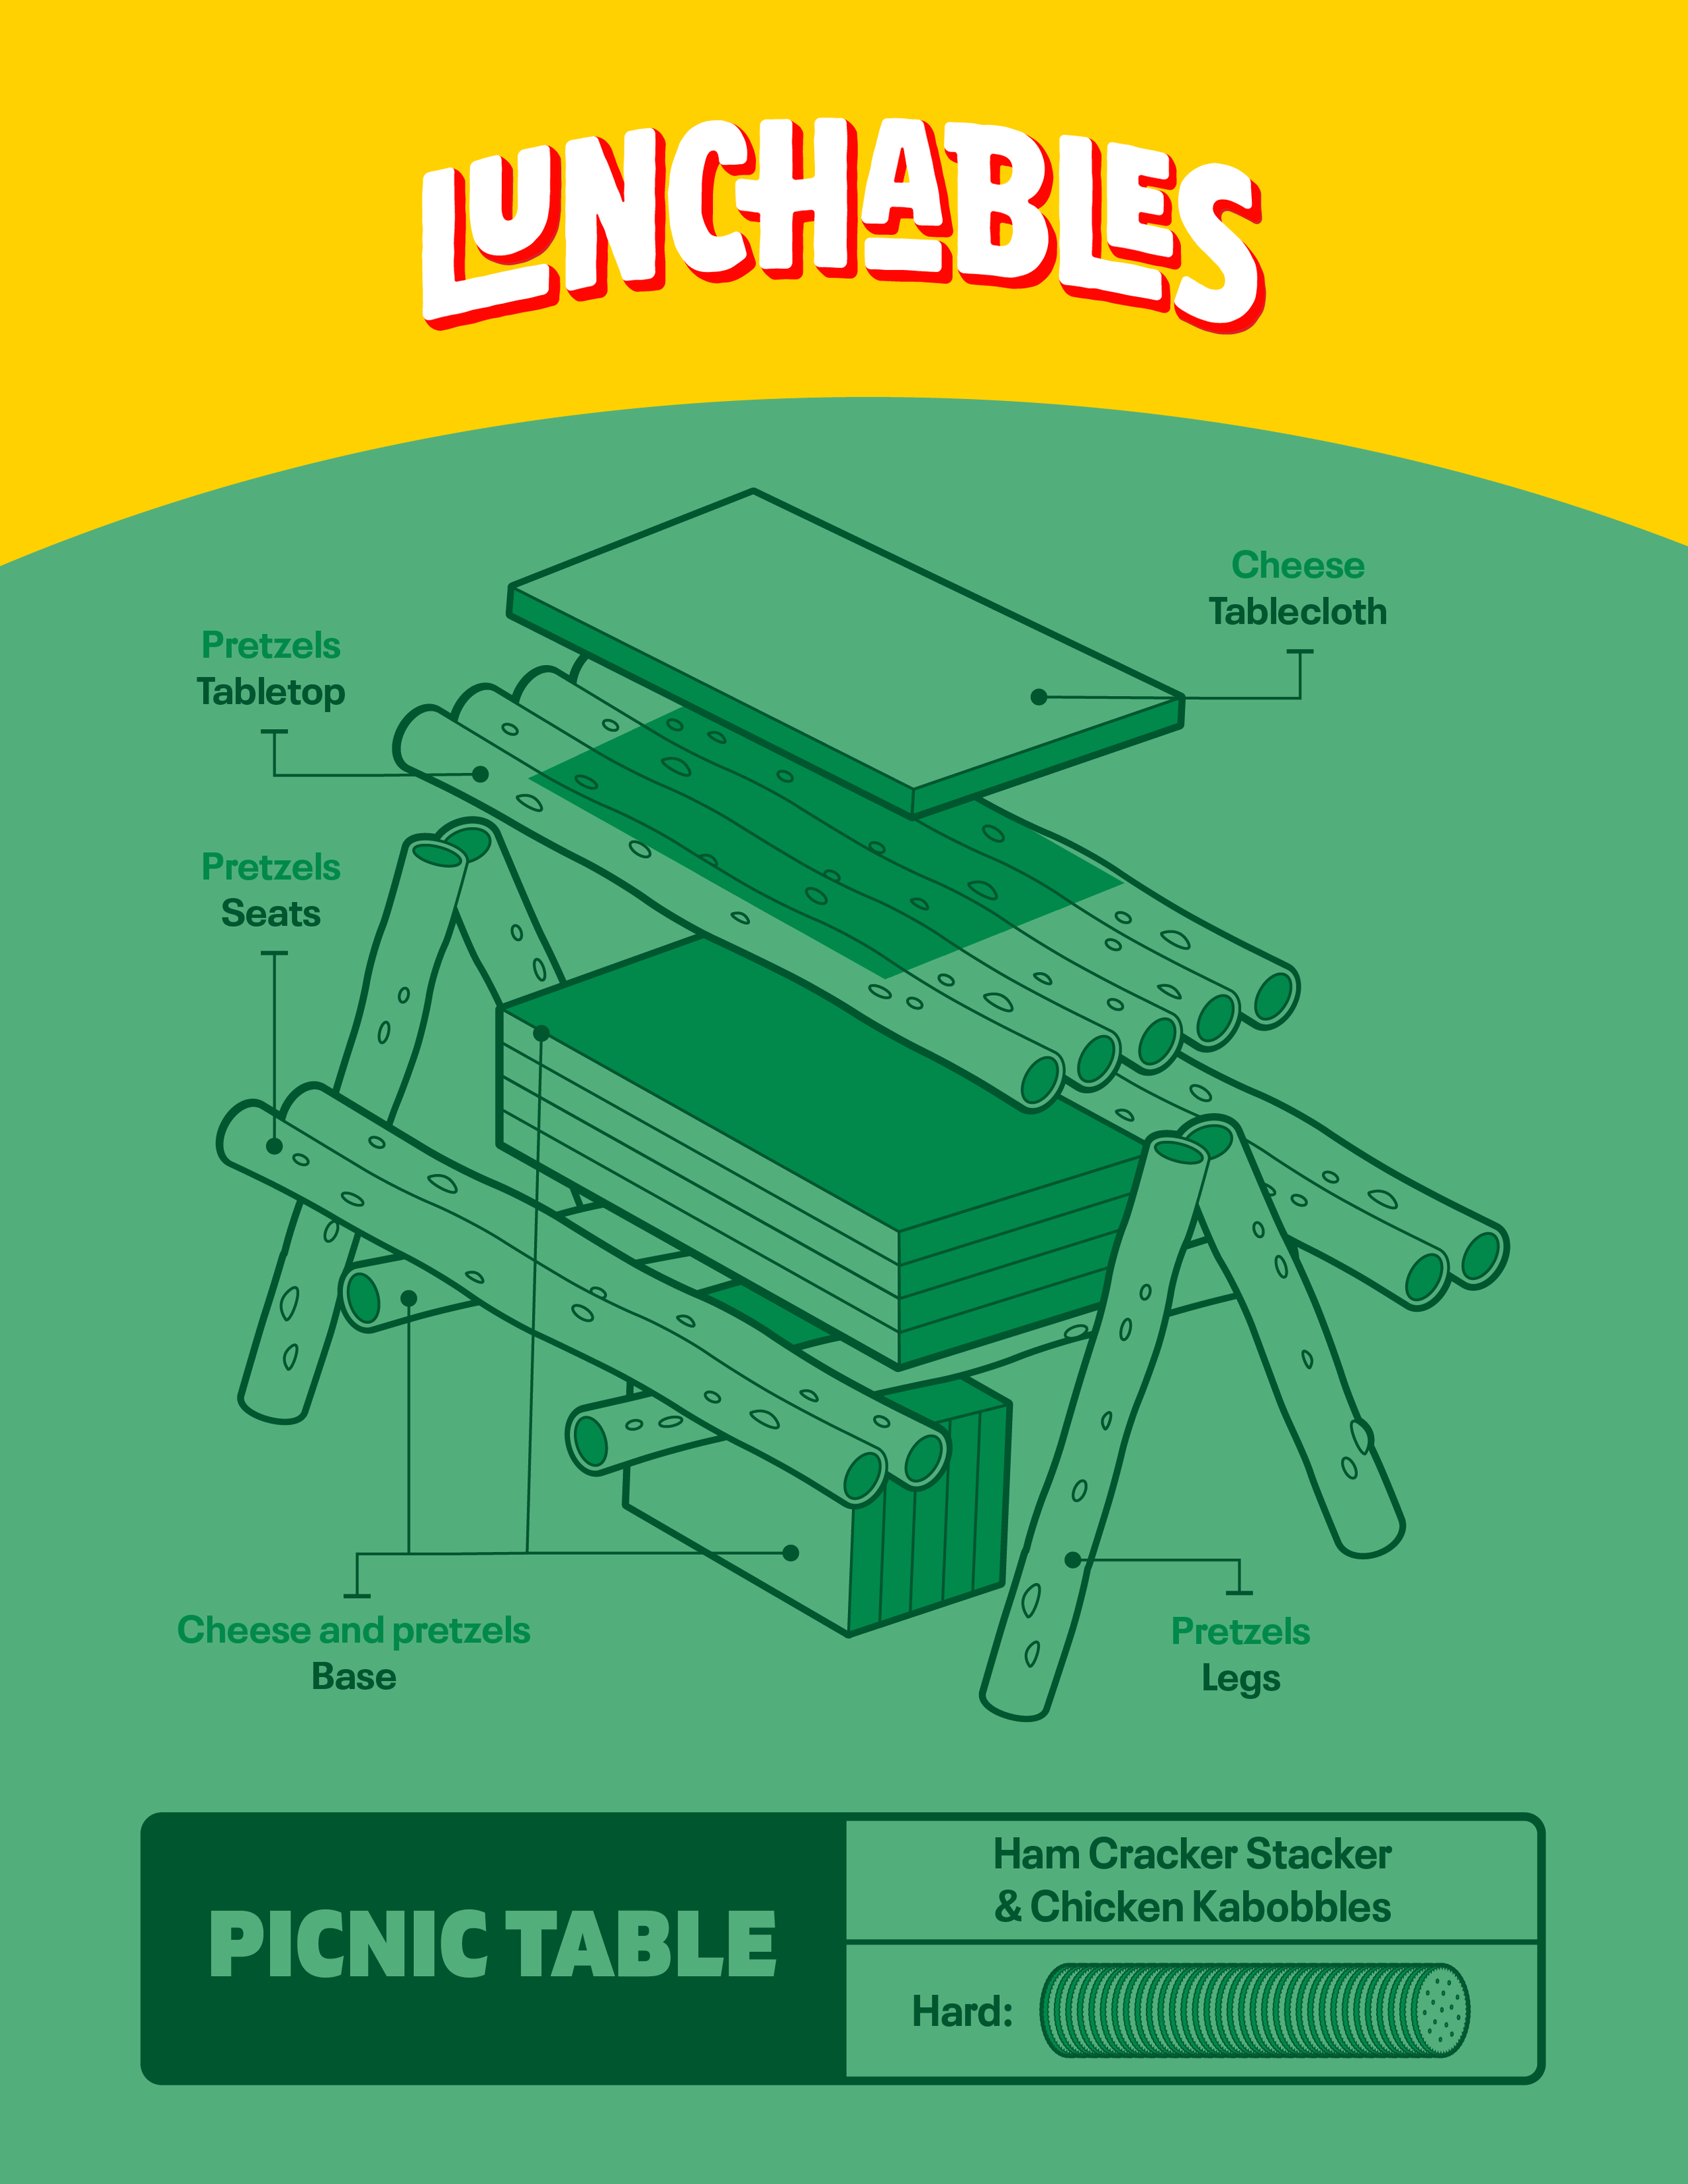 Youprint_Lunchables Picnic Table.png